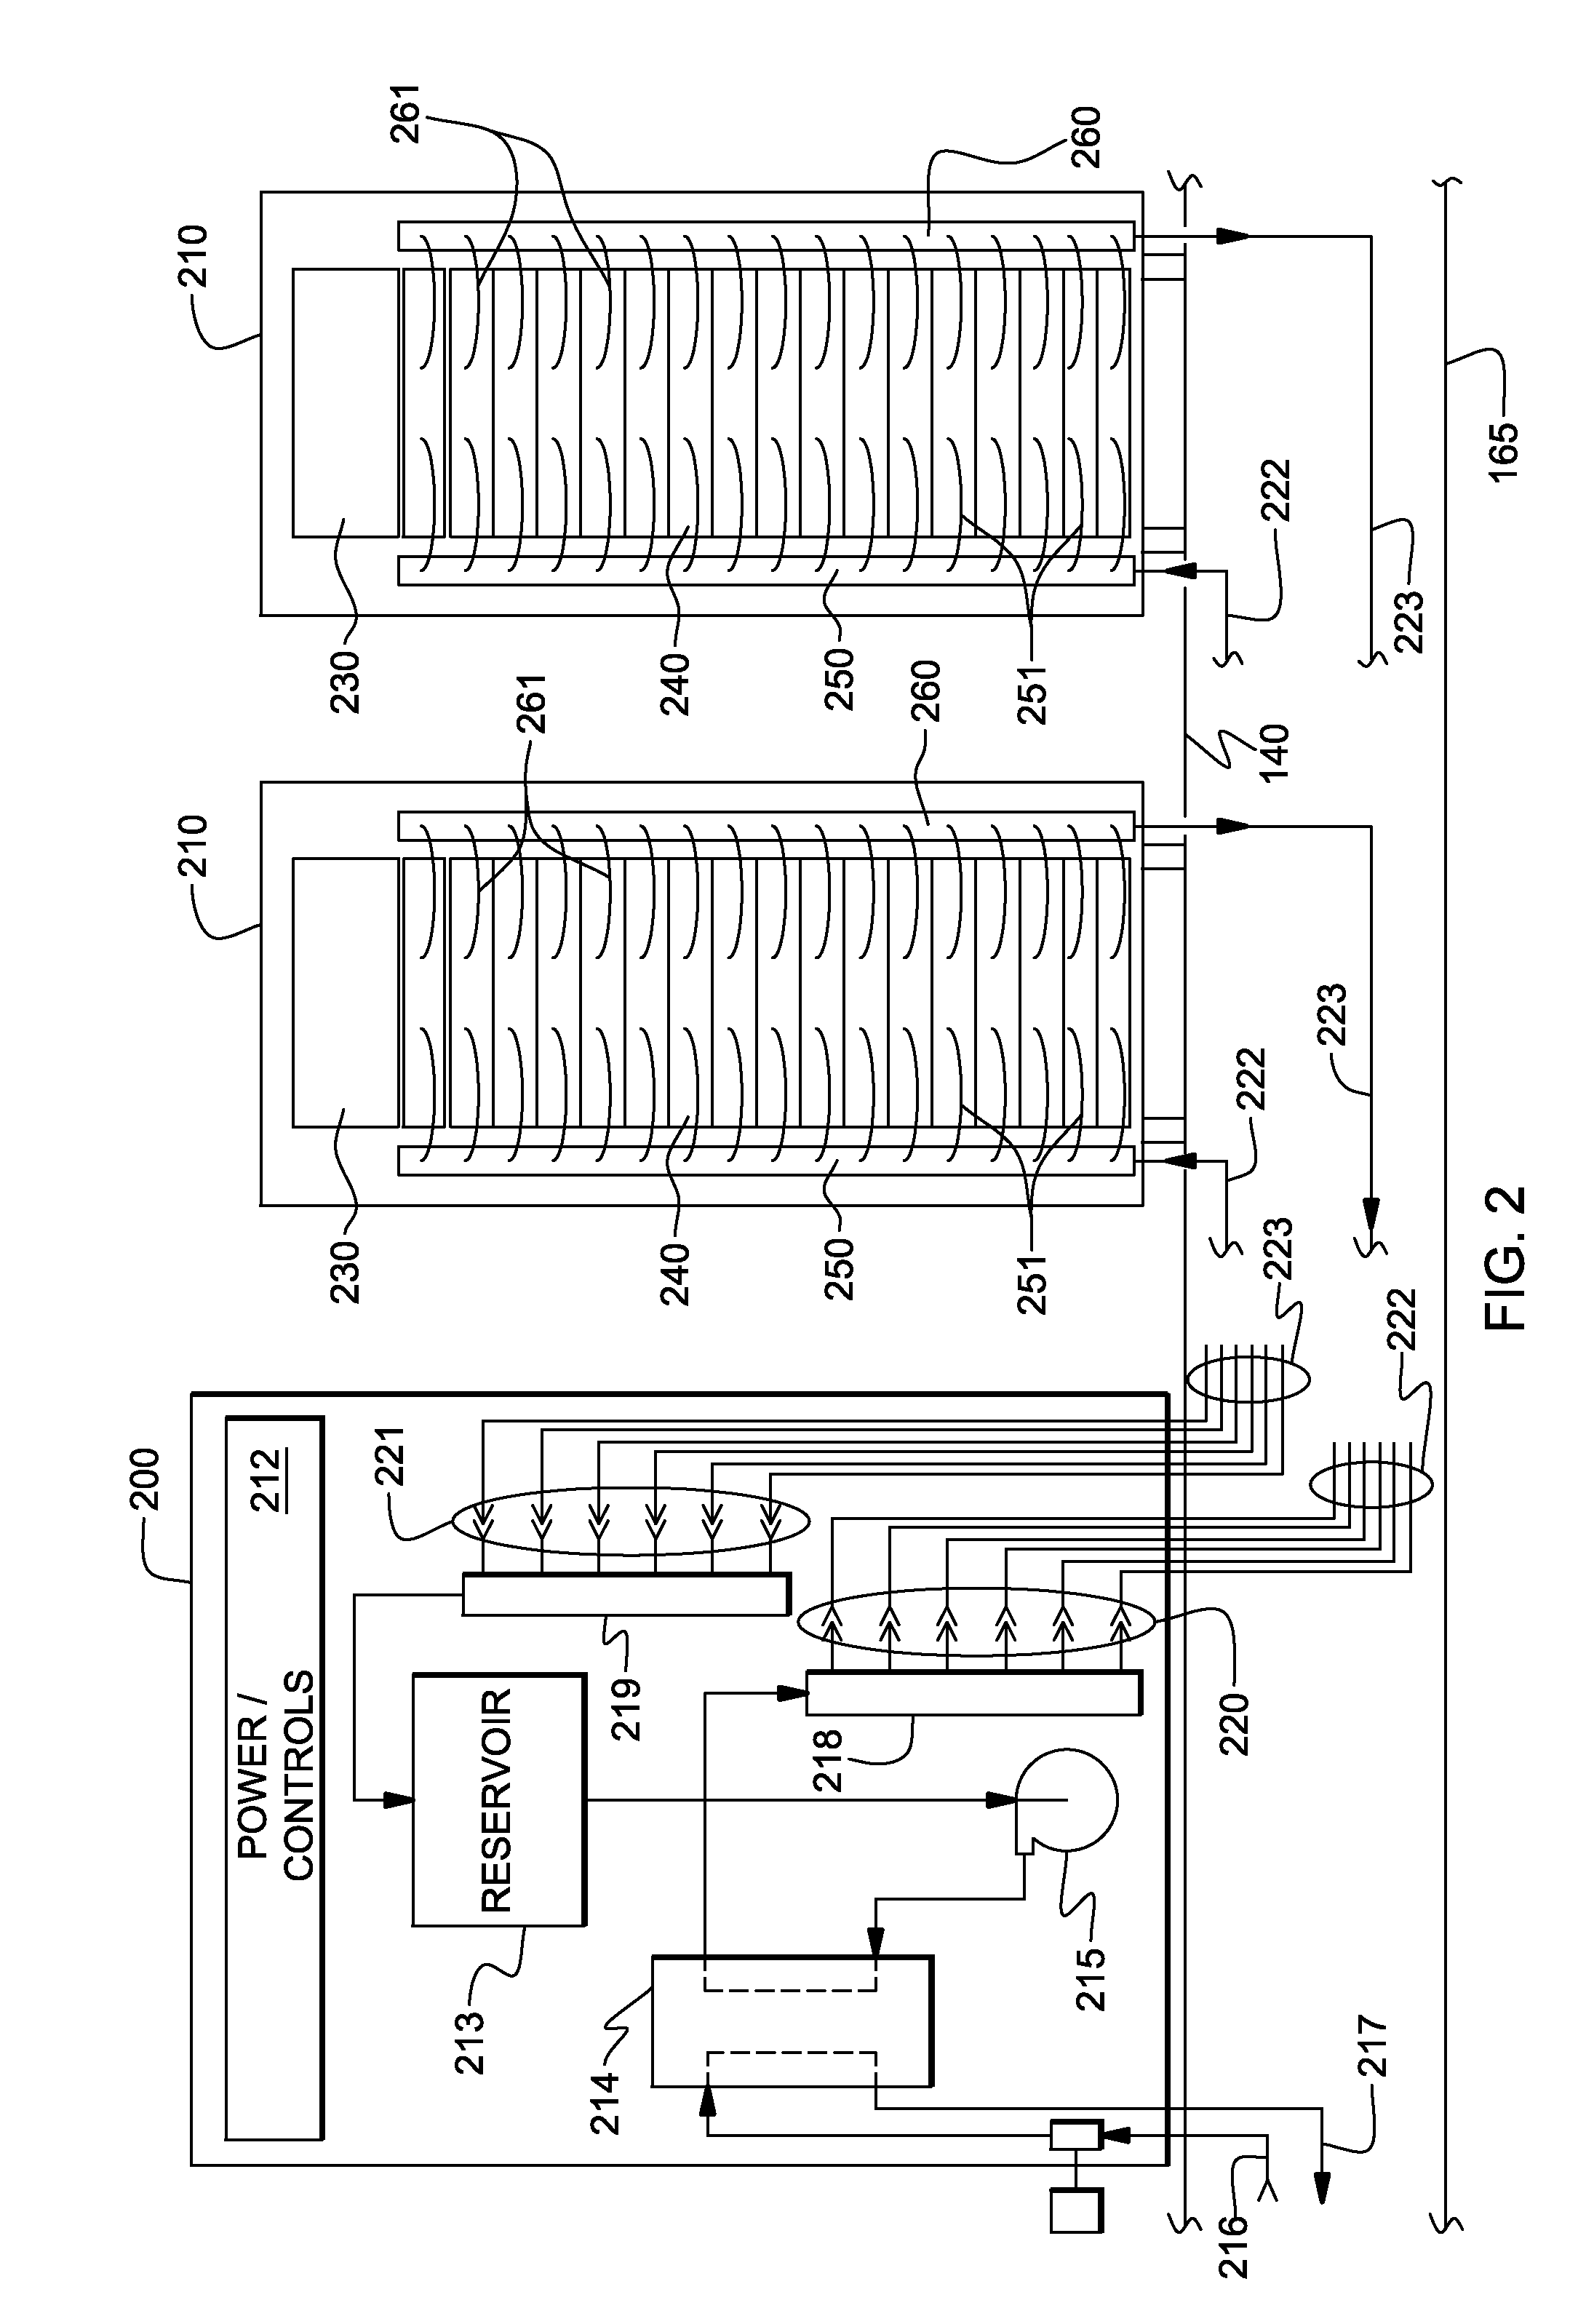 Pump-enhanced, immersion-cooling of electronic component(s)